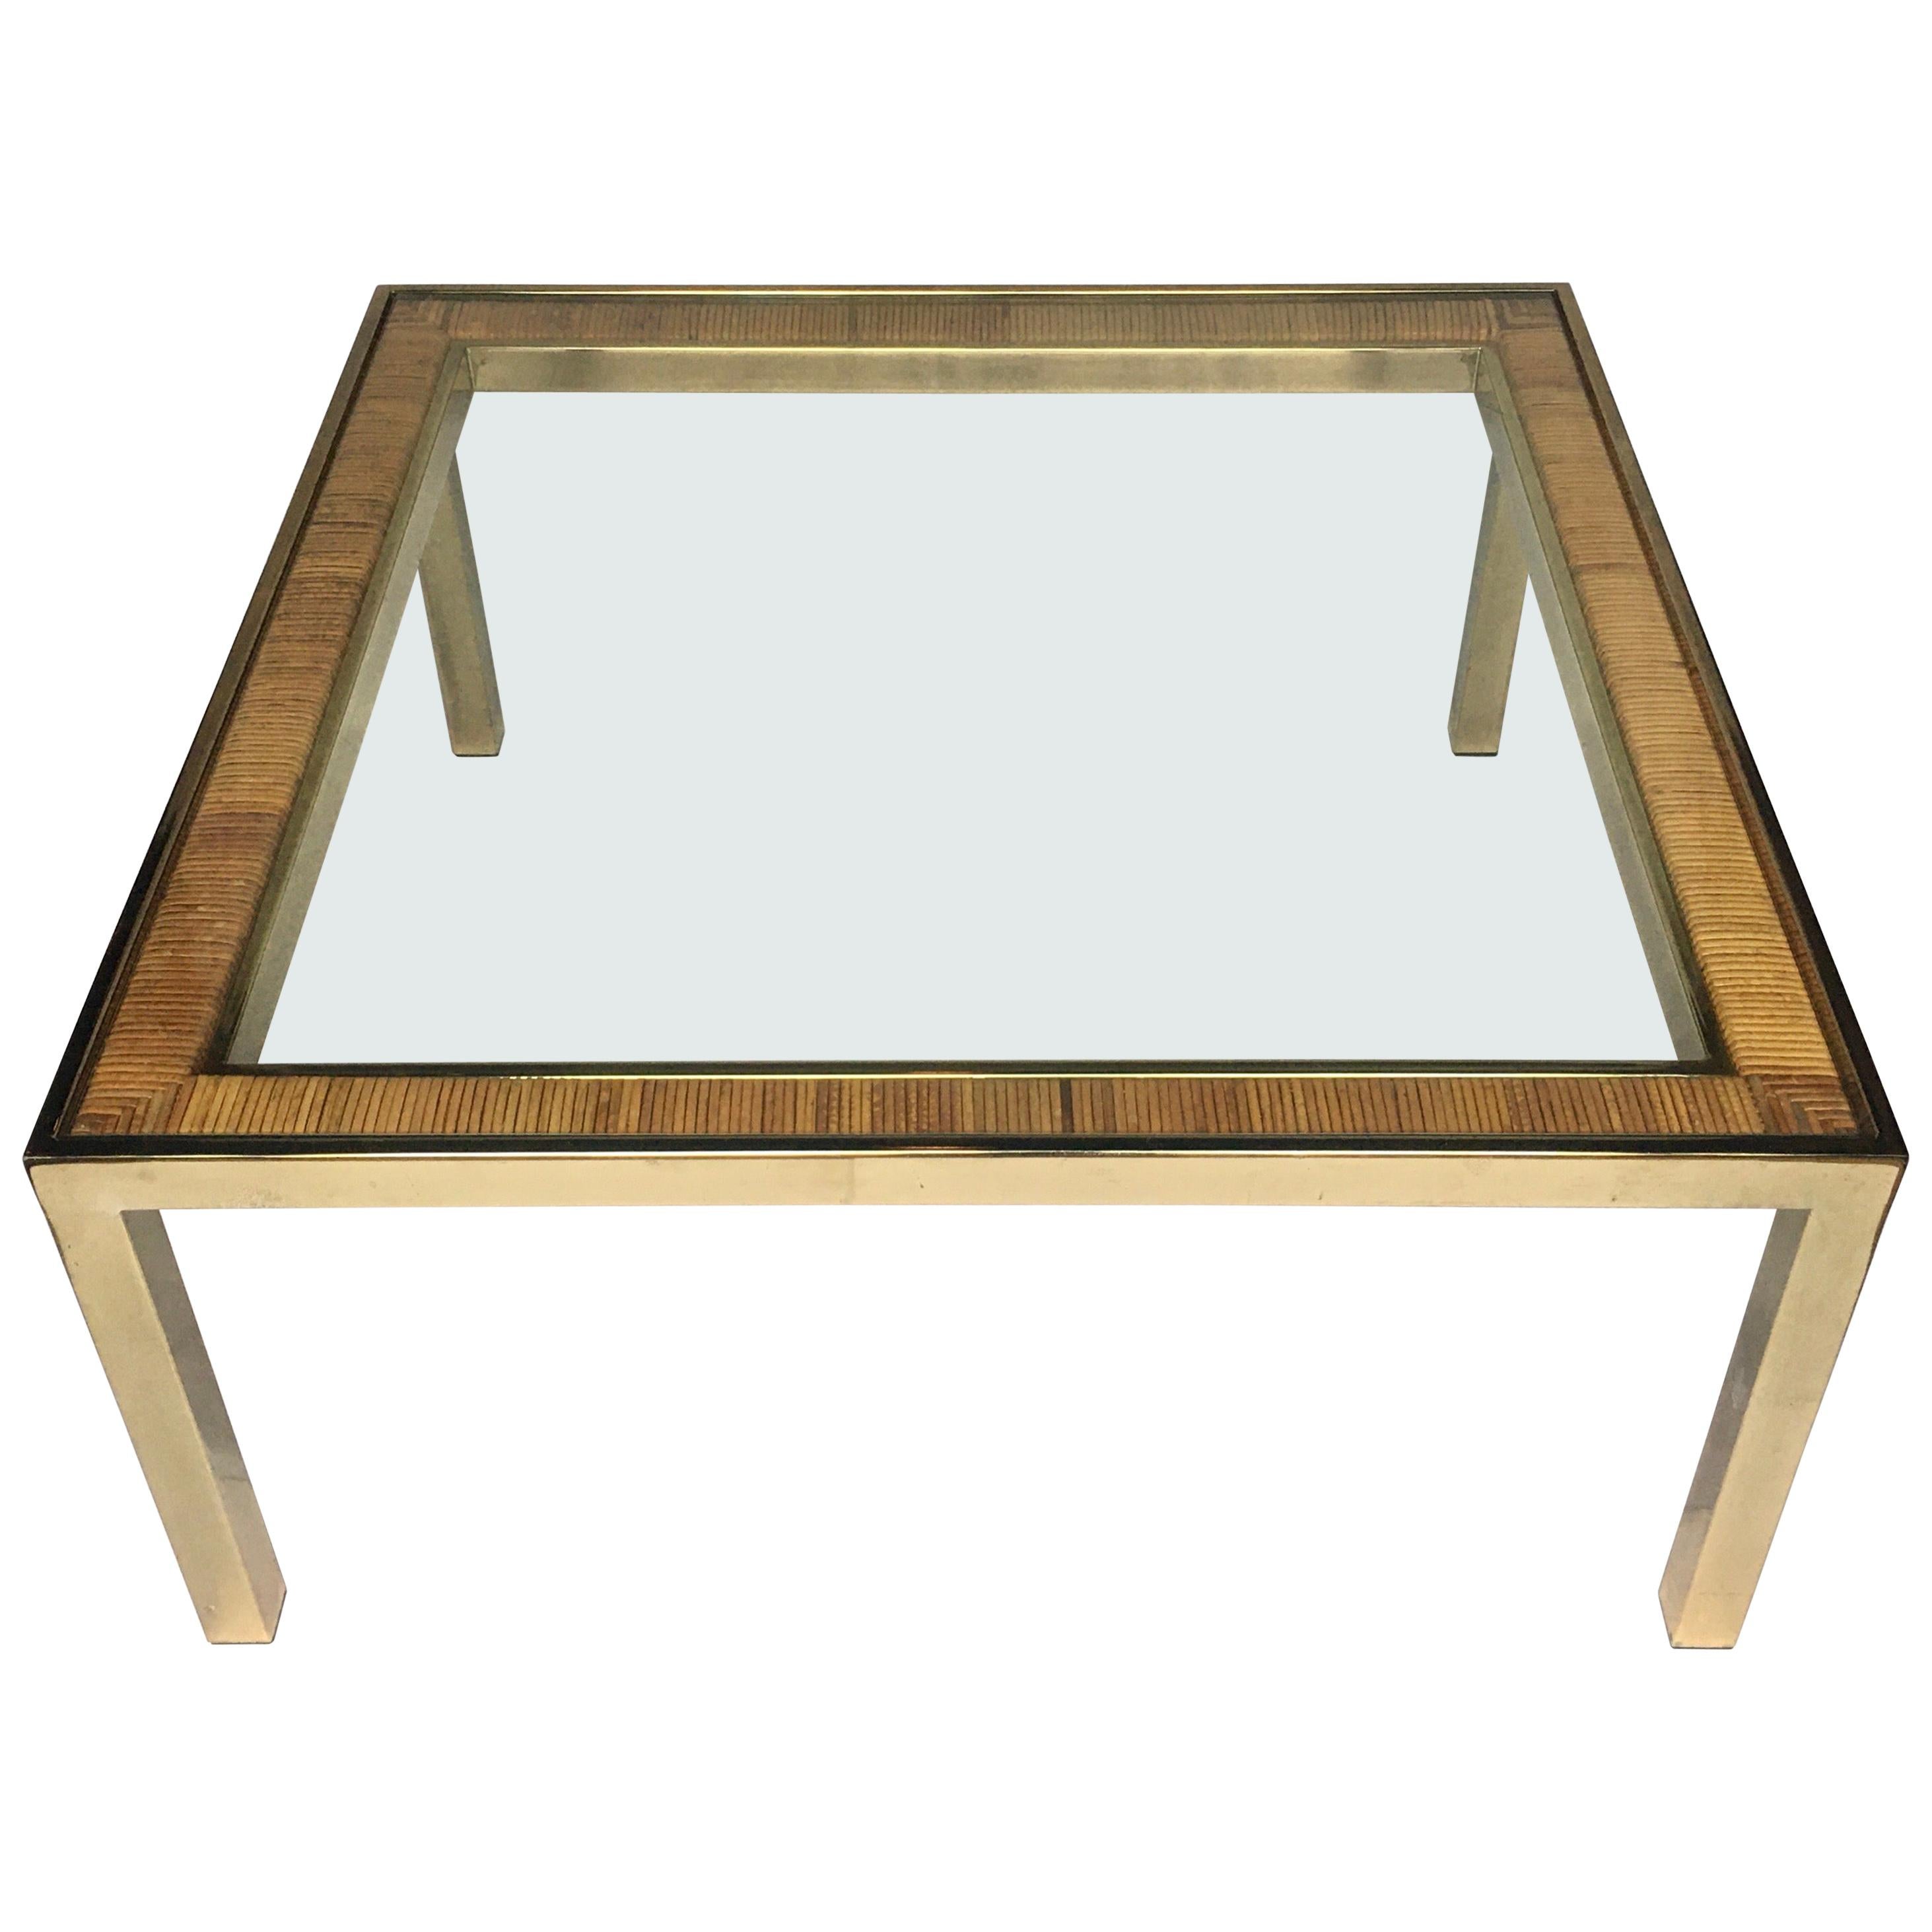 Mid-Century Modern Square Brass and Rattan Coffee Table, Milo Baughman DIA Style